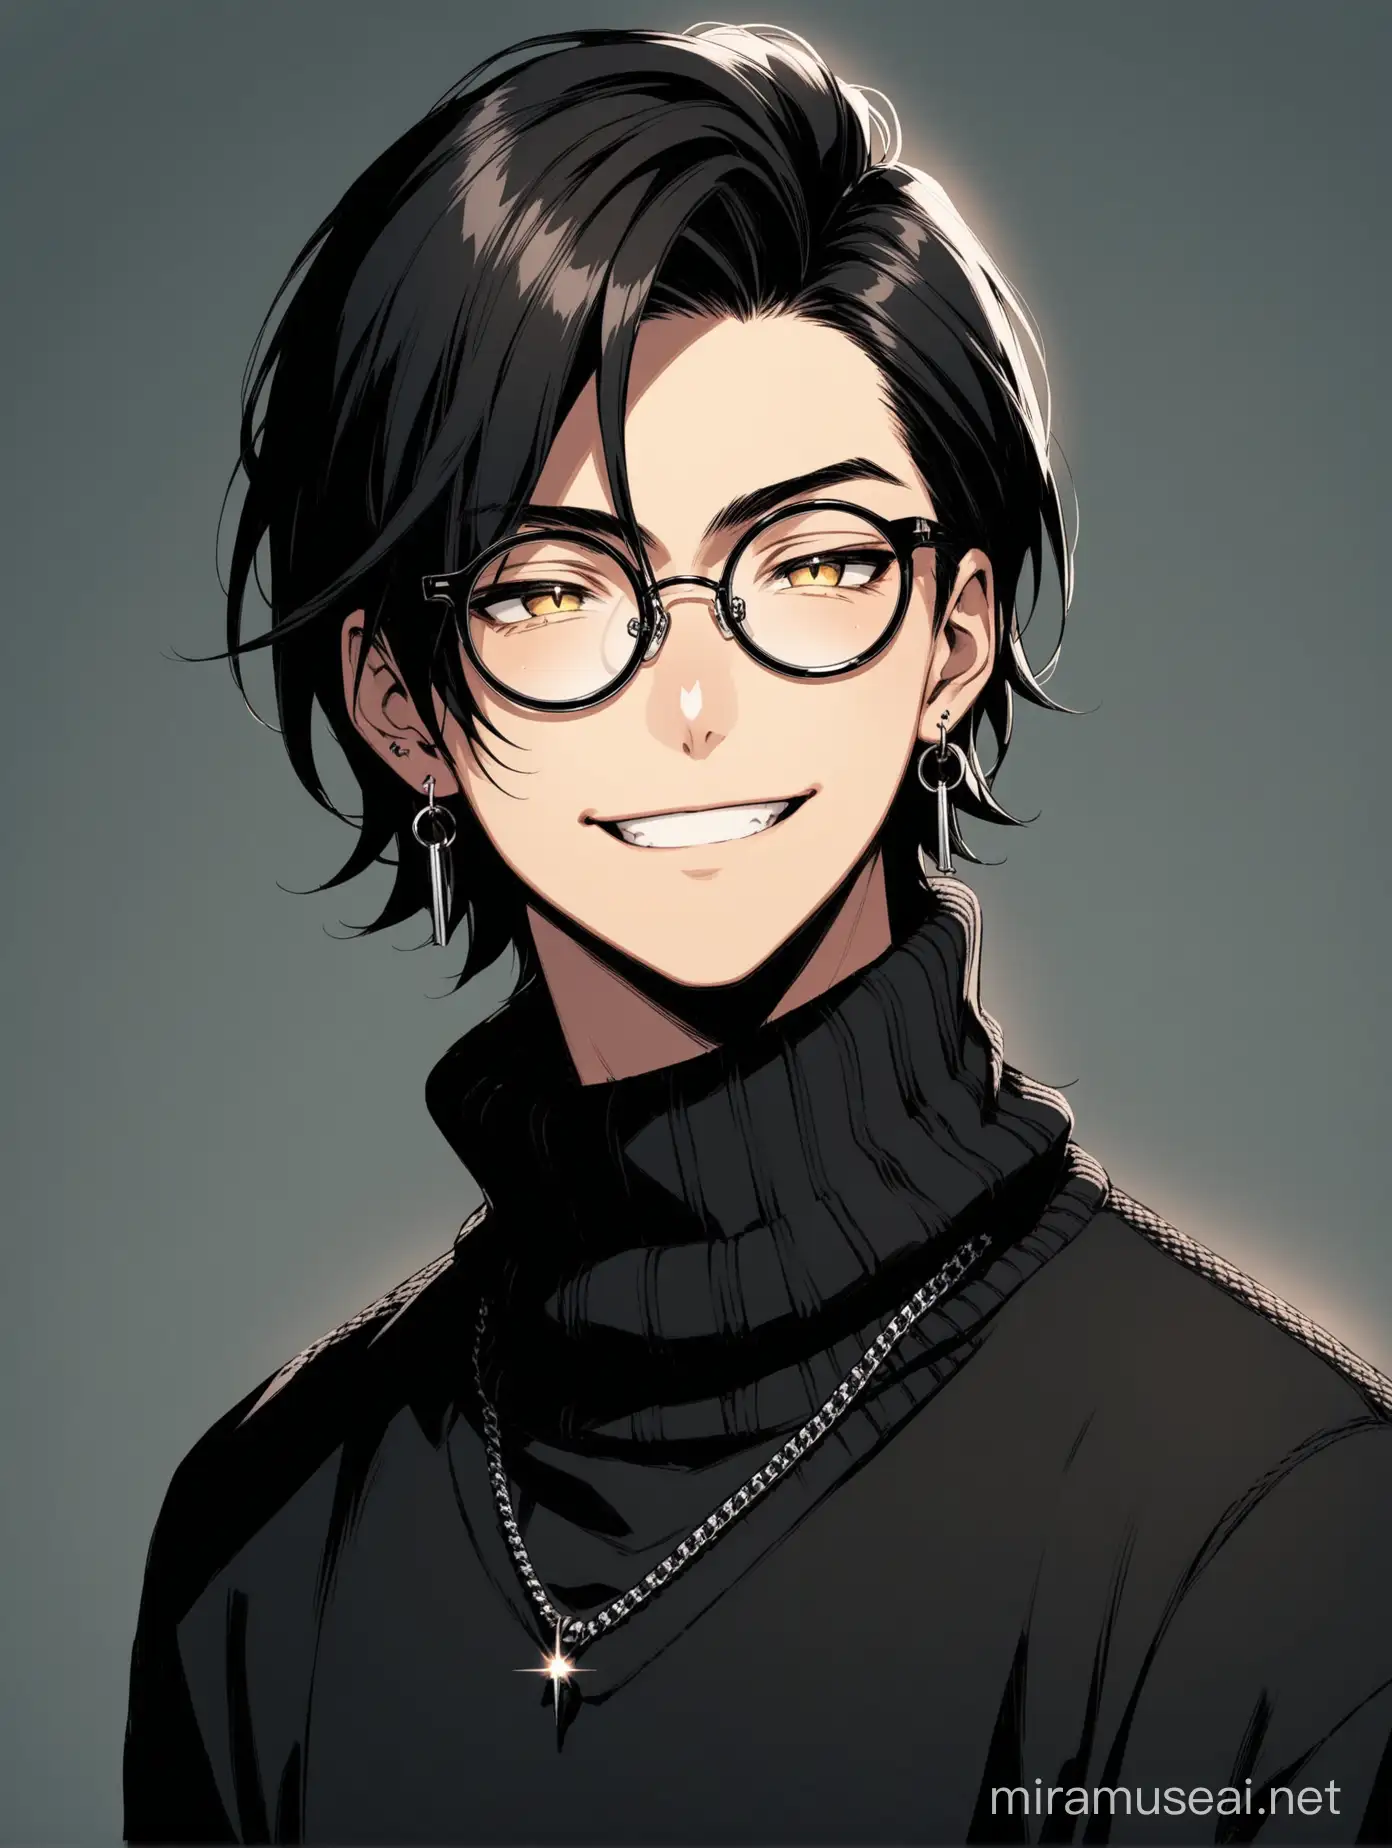 A handsome teenager with a malicious smile from the side of his mouth. His hair is black and styled in a bad boy style. He wears black round-rimmed glasses. He wears a long turtleneck and his glasses shine. He wears earrings.